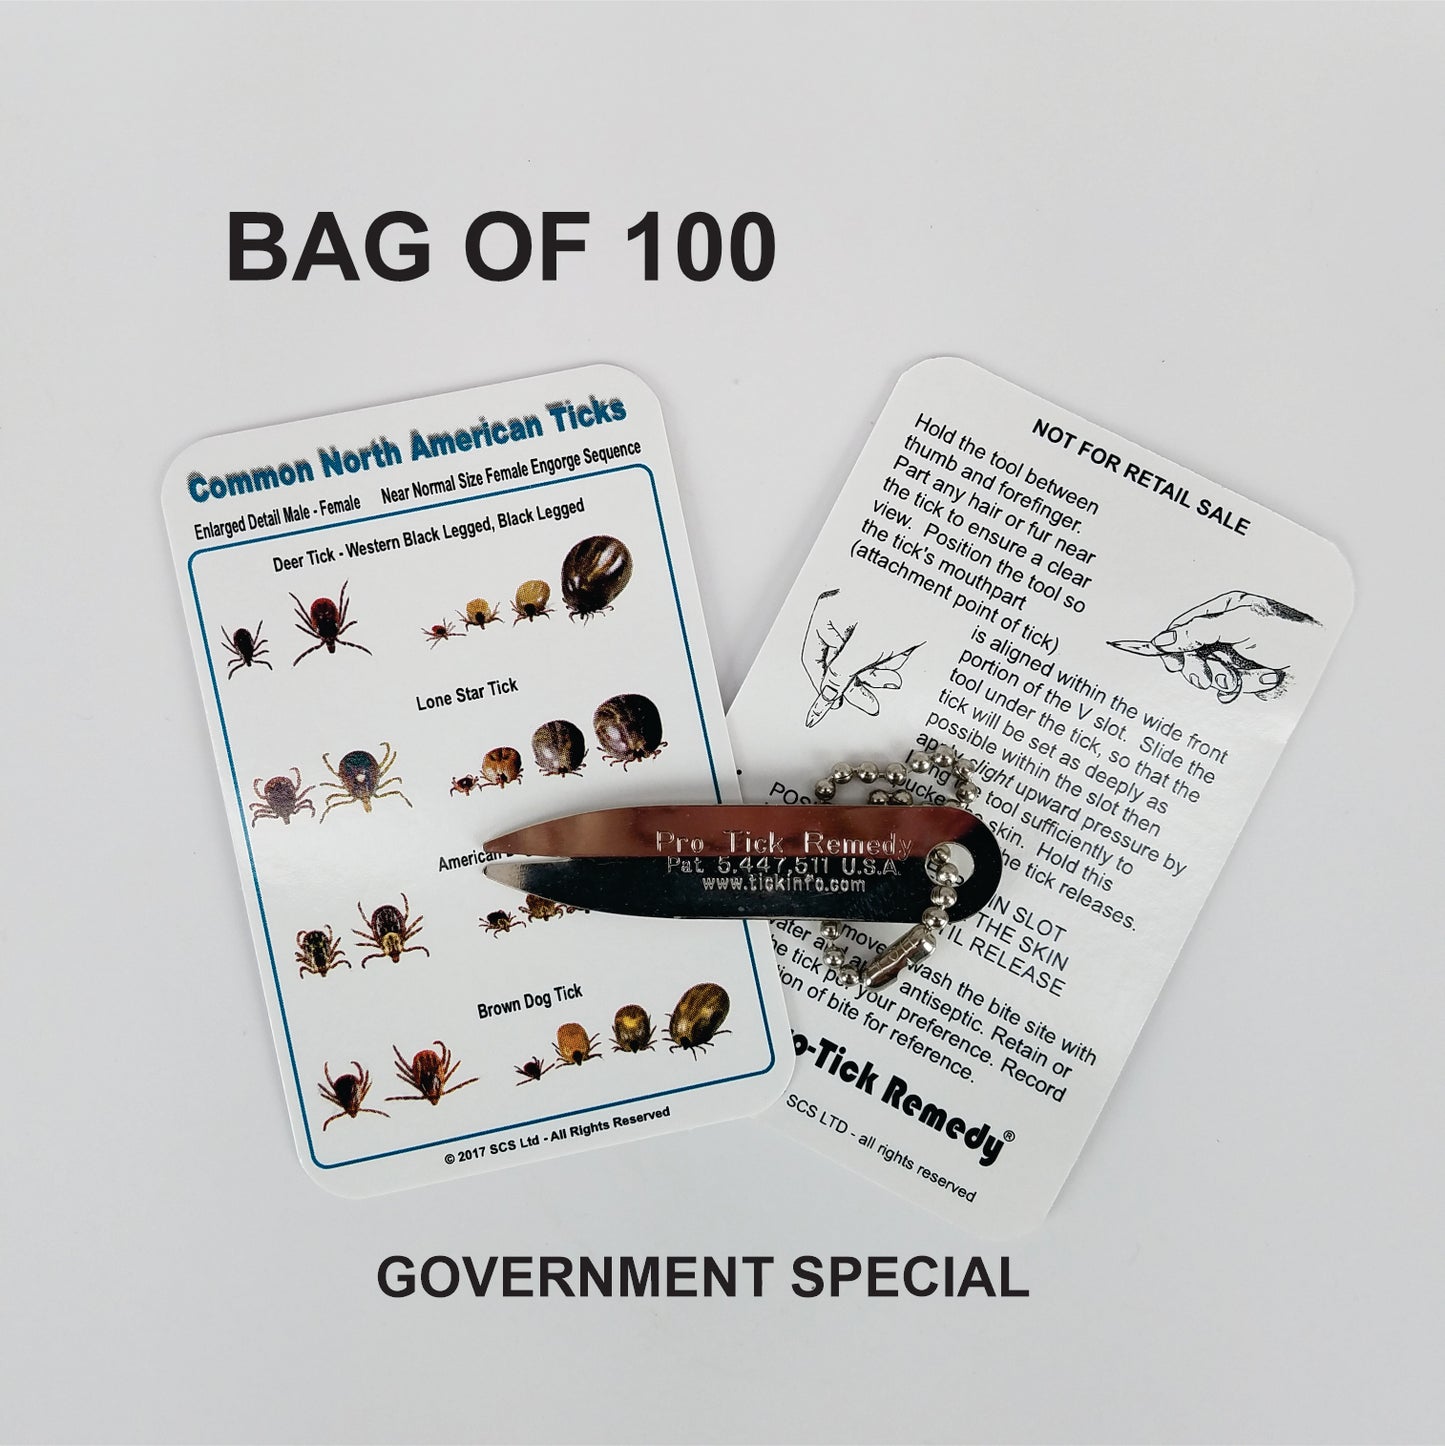 ProTick Remedy (BAG 100) + Tick ID Card for Government and Community Outreach Programs - GOVSPECIAL FREE SHIPPING WITHIN USA